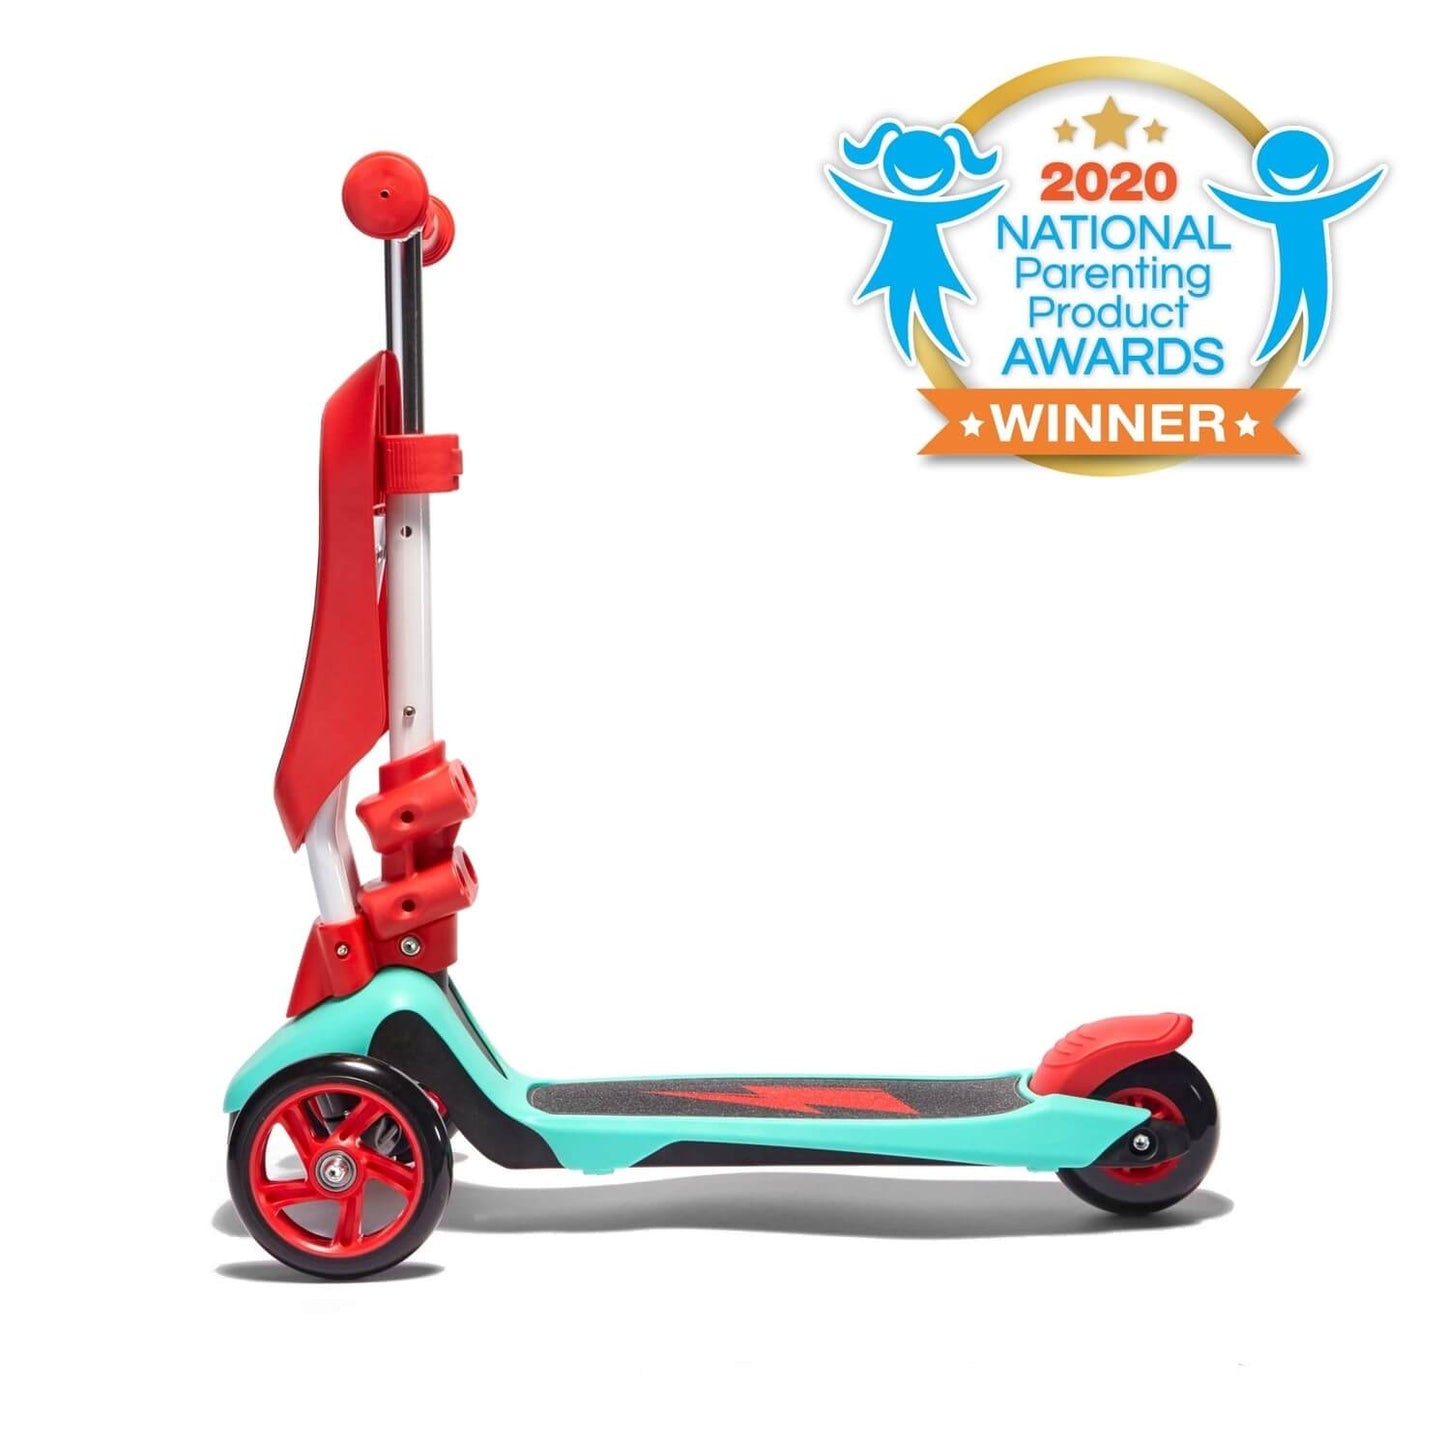 Award winning Svolta Ace 2-in-1 Toddler Scooter Ride On Red Aqua Side Seat Up Standing